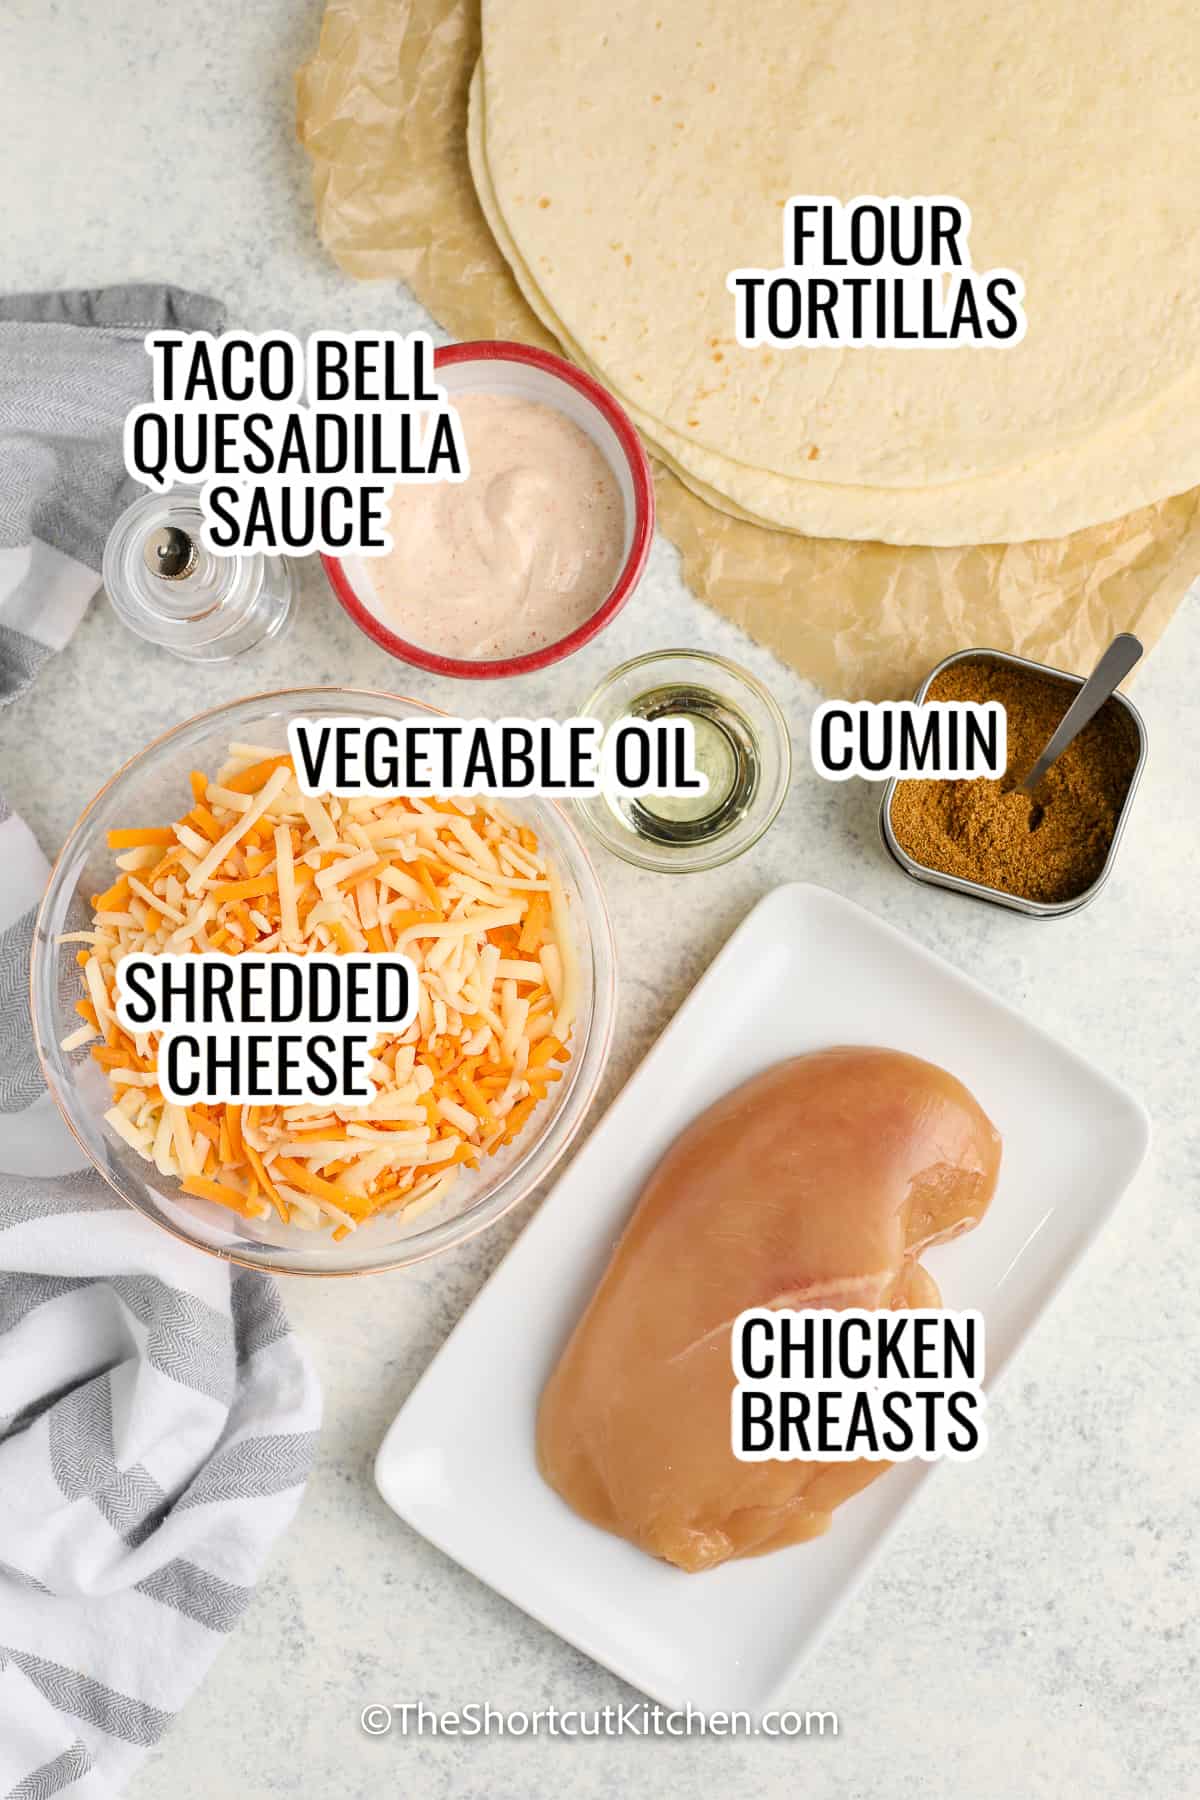 ingredients assembled to make copycat taco bell chicken quesadillas, including flour tortillas, quesadilla sauce, shredded cheese, chicken breasts, cumin, and vegetable oil